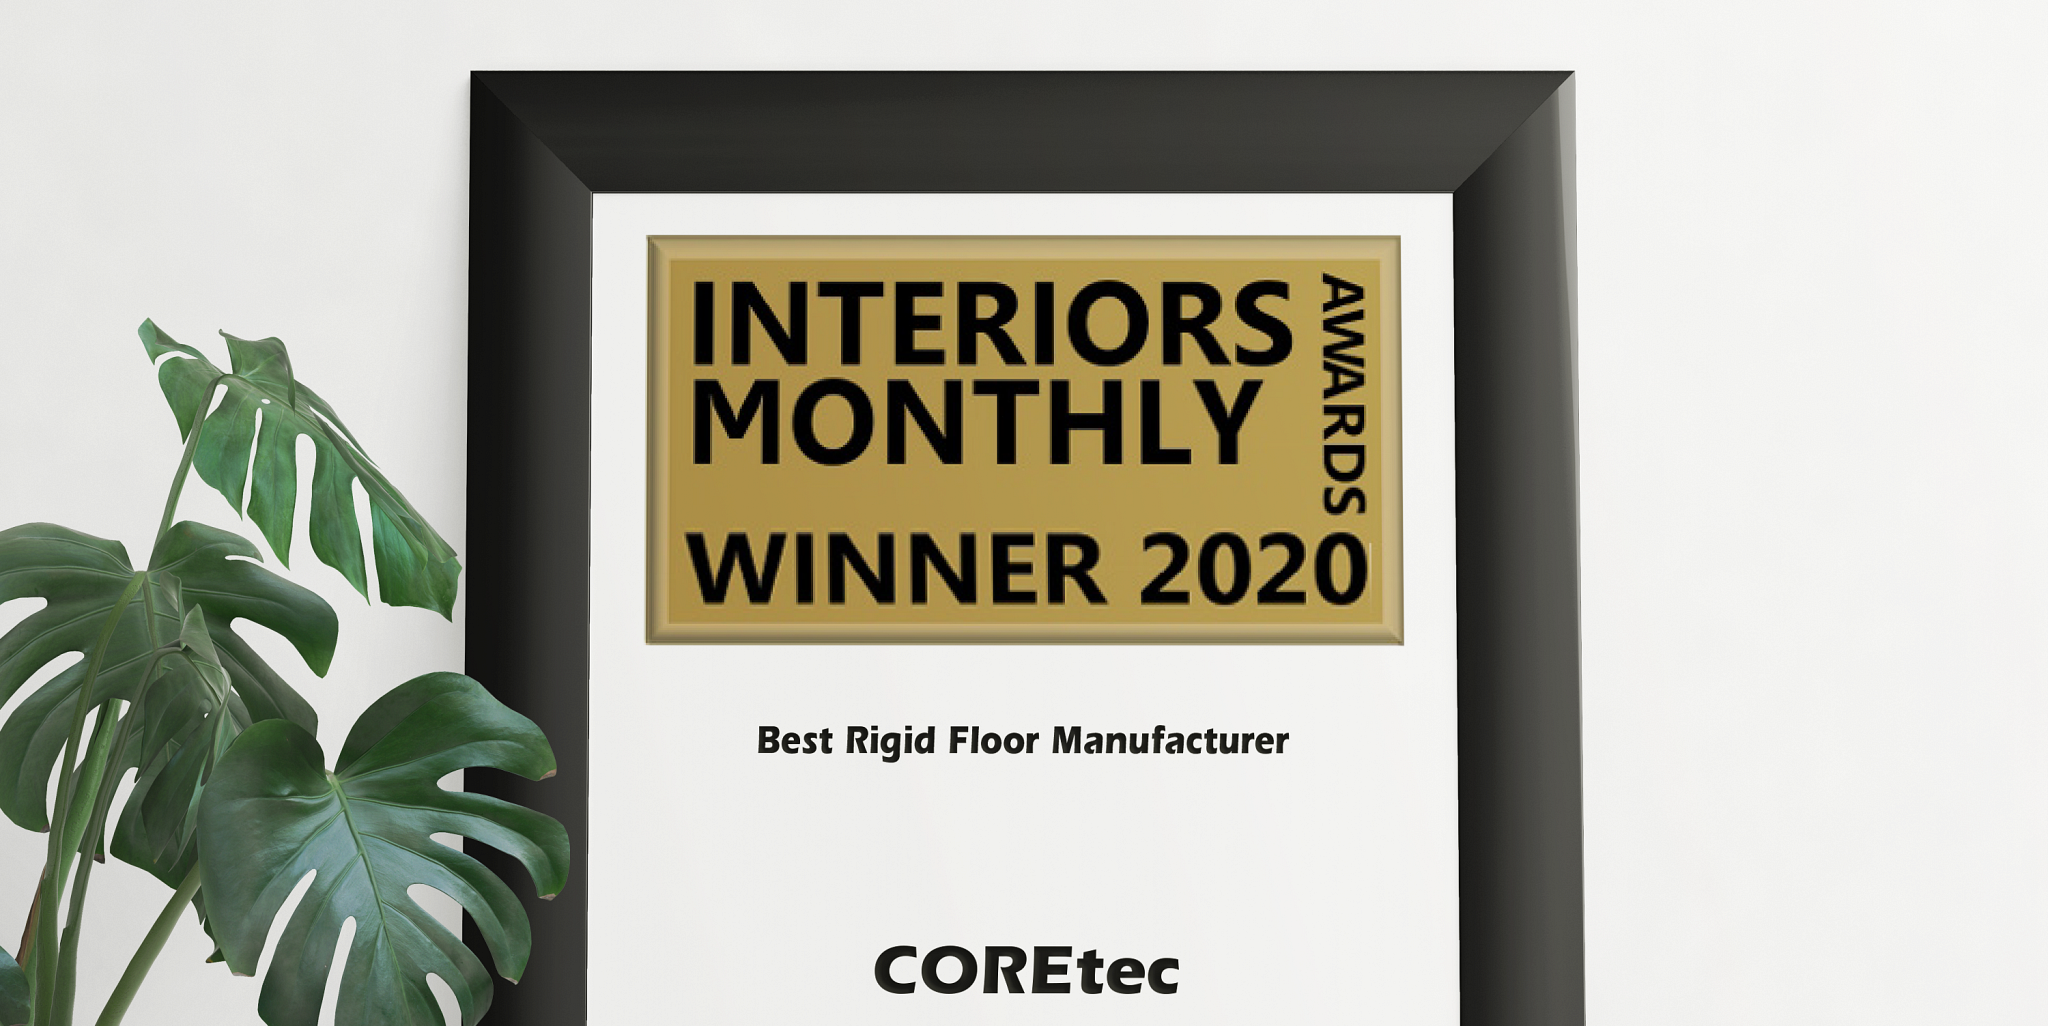 We are proud to announce that we are the winner of the Interiors Monthly Award in the category 